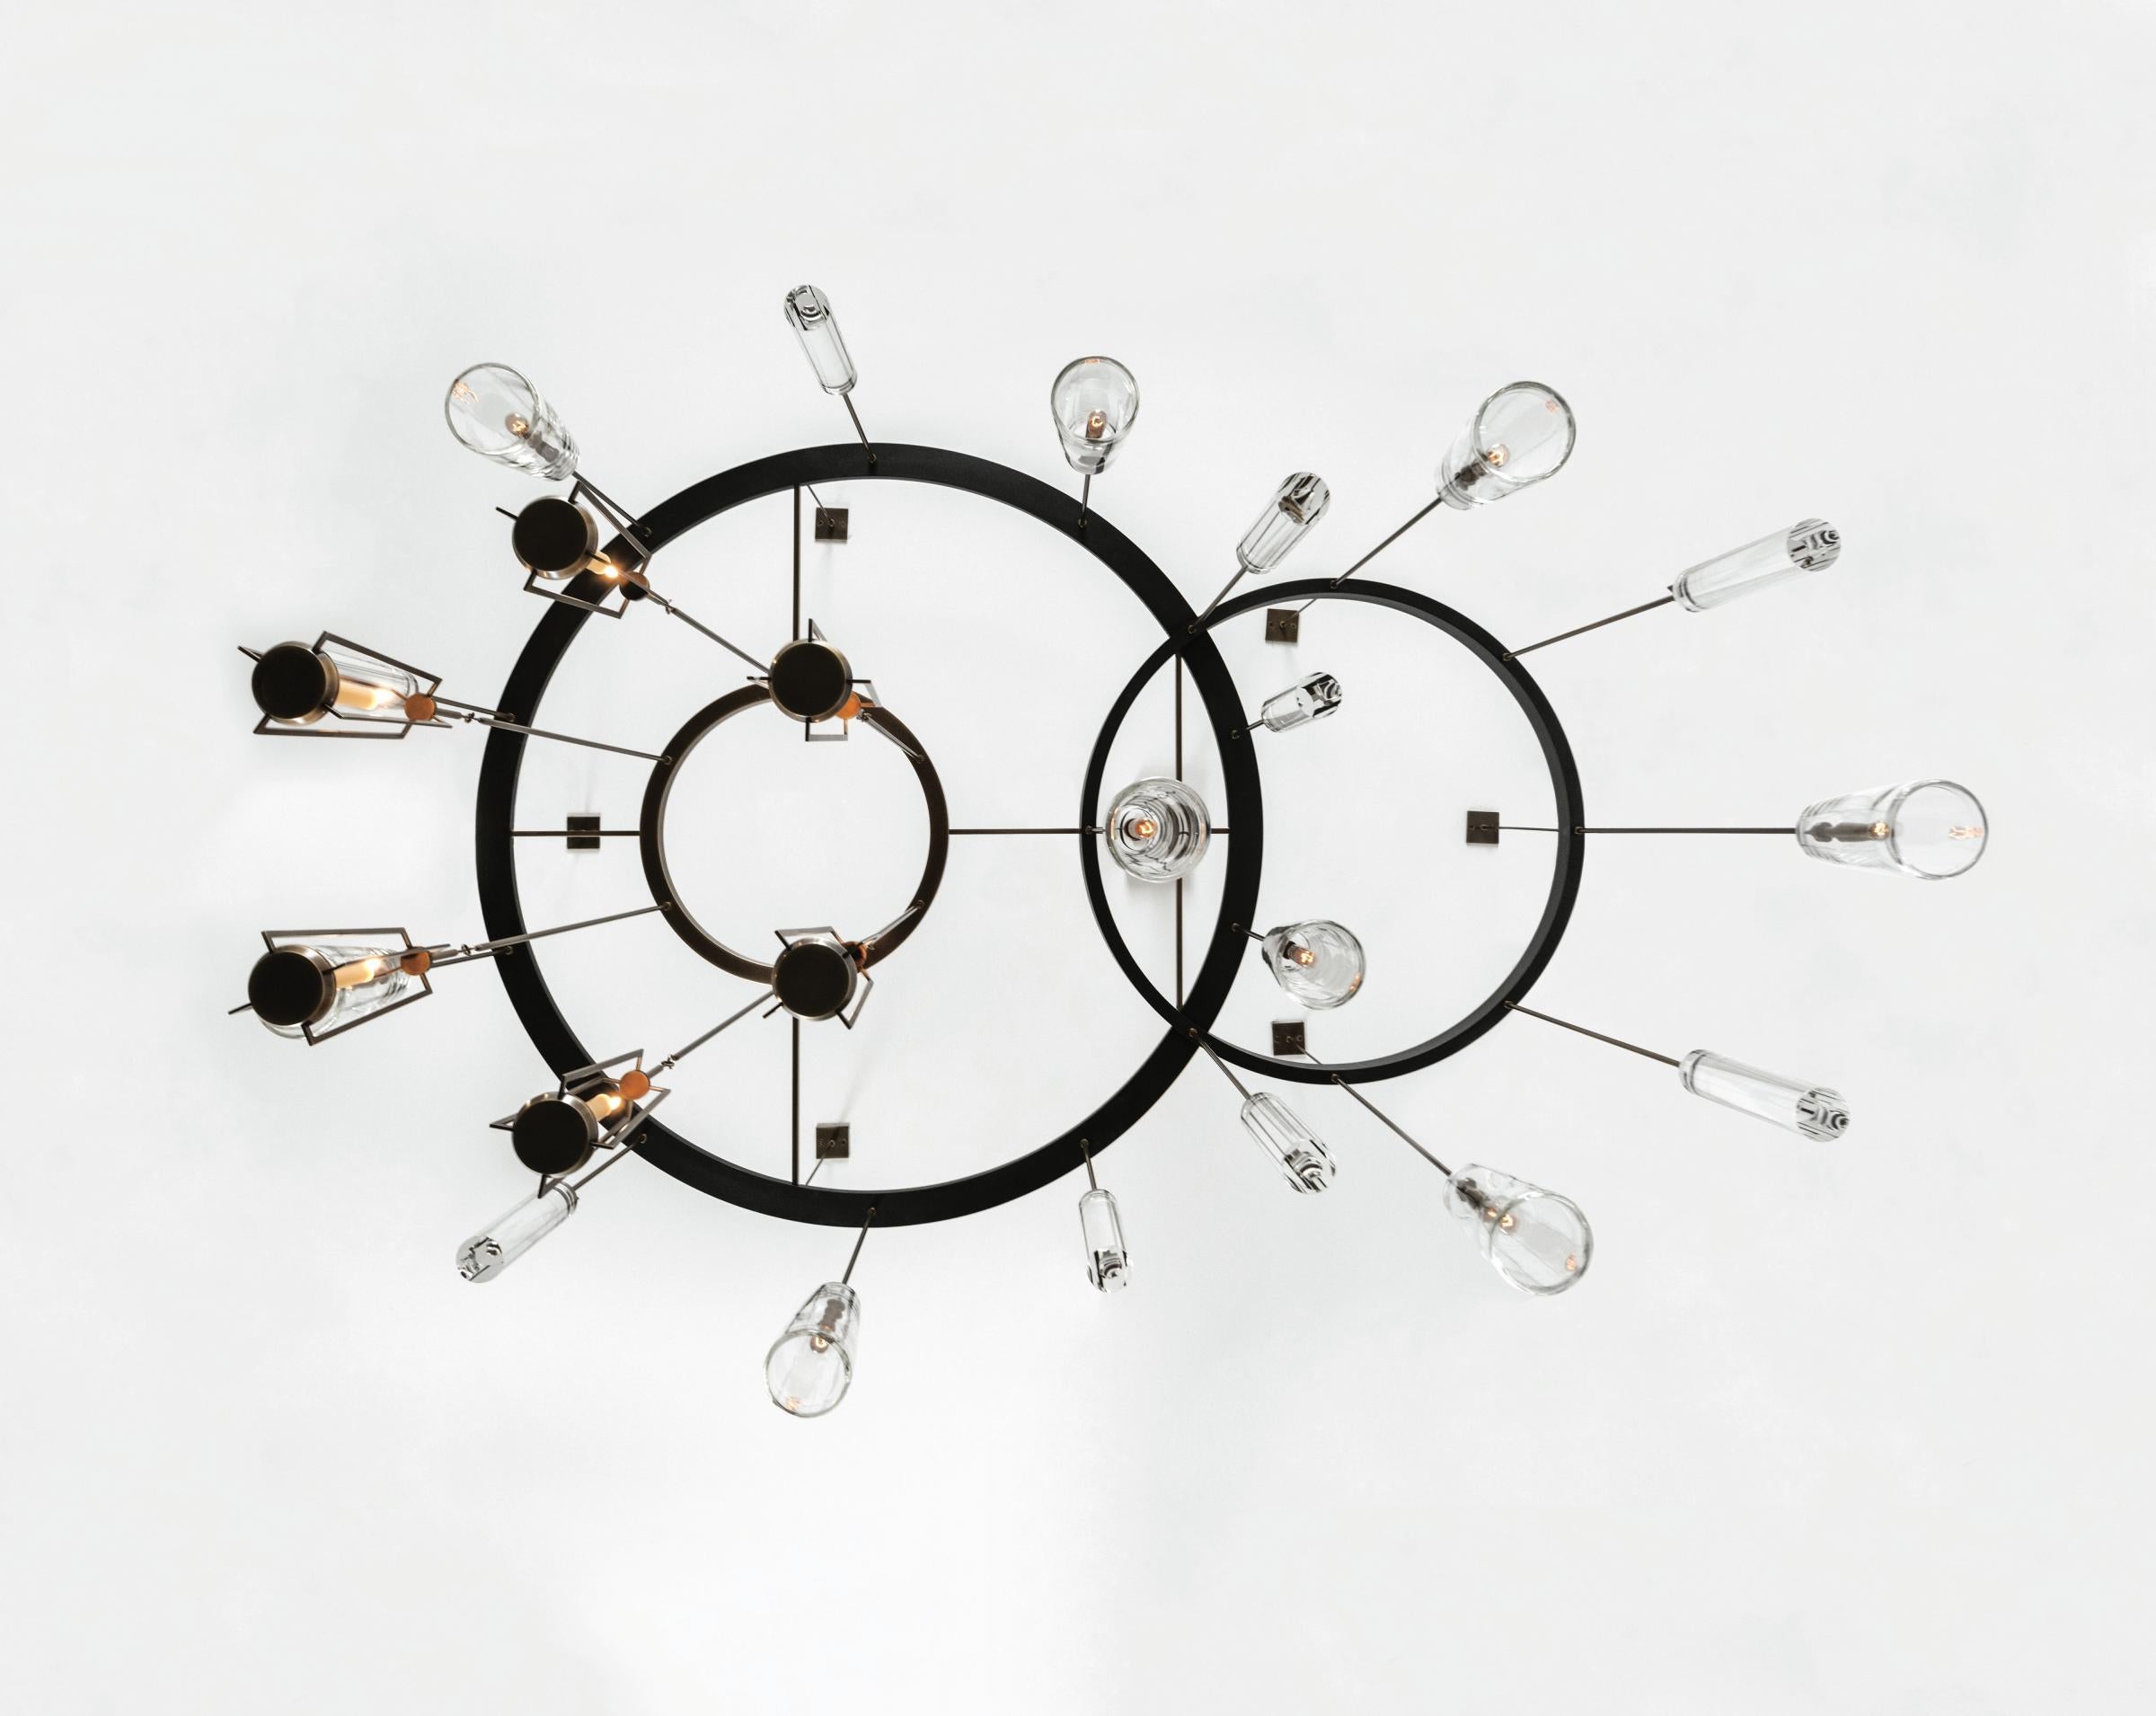 Soft light, precise details
Designed to mimic the intricate gears of a clock, this sculptural chandelier is made of three interlocking bronze and steel rings.
The solid hand-blown crystal weights refract and distort the light, giving viewers a